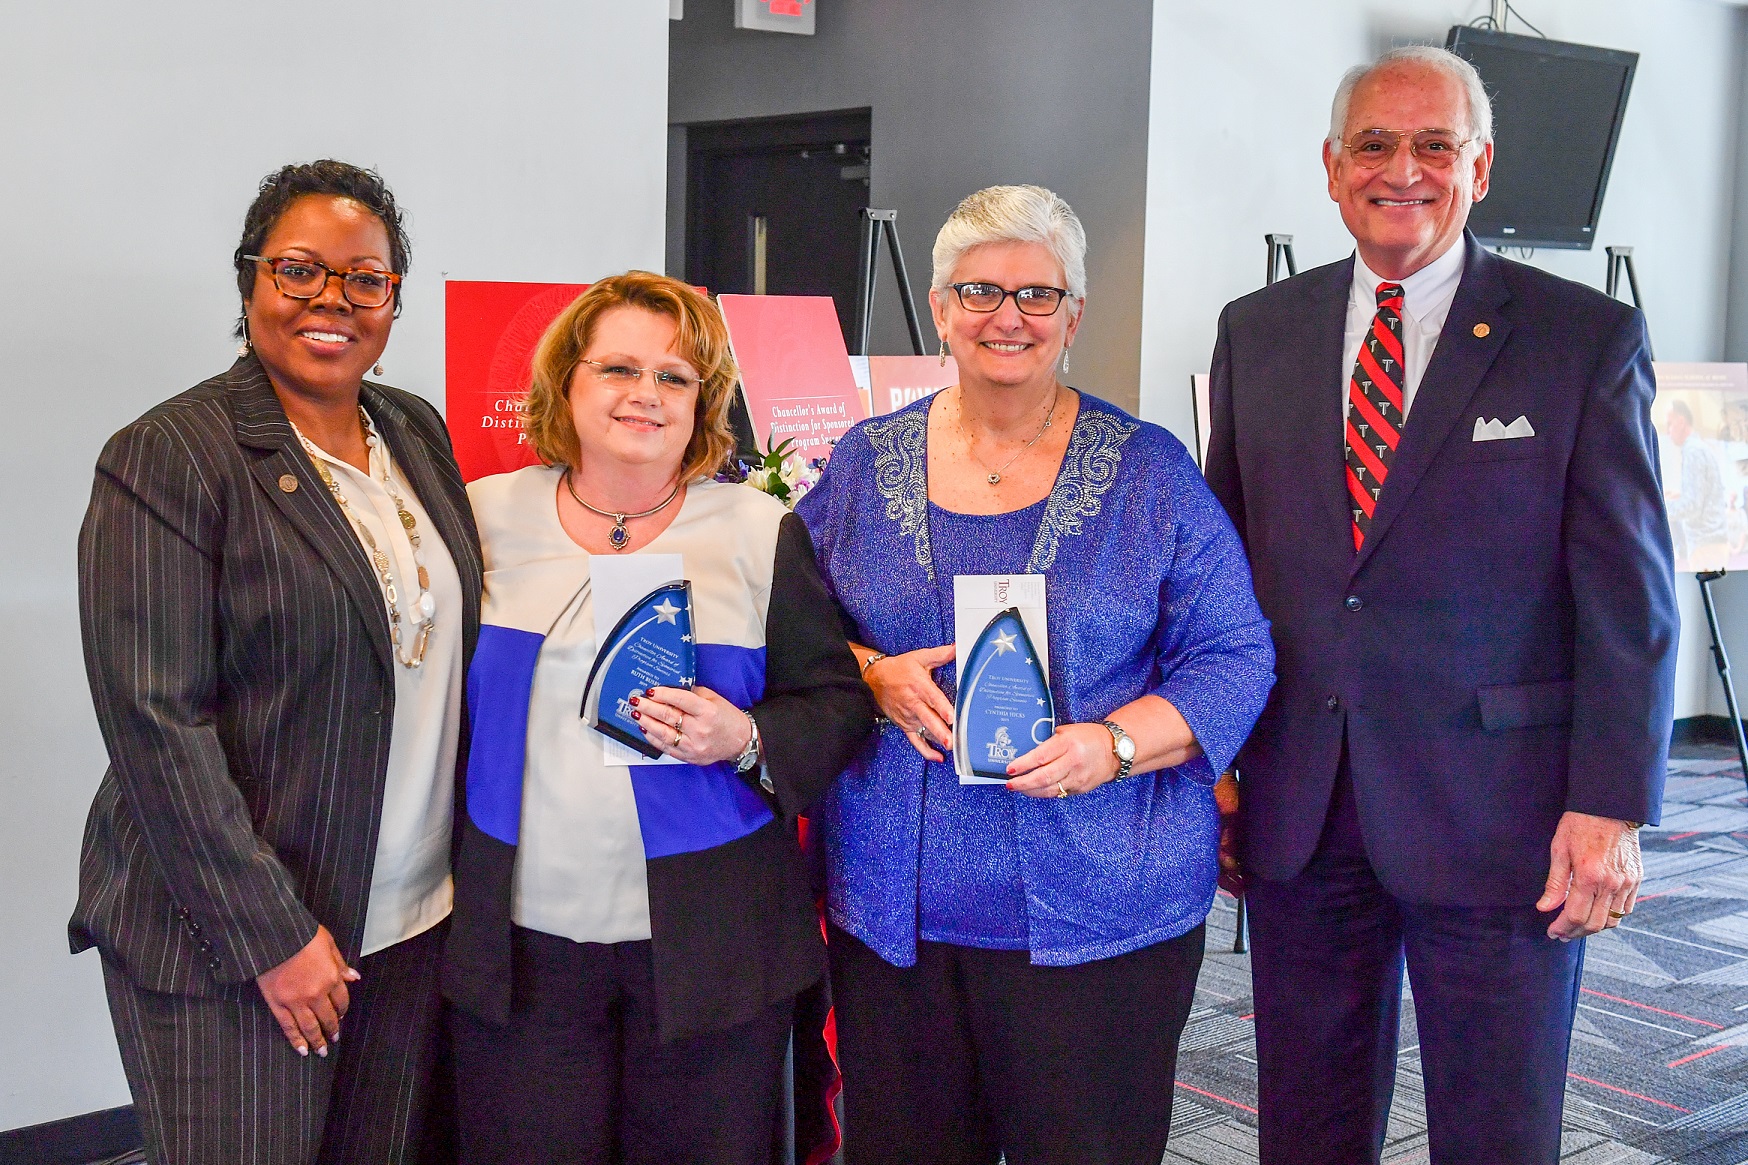 2019 Chancello's Award of Distinction Dr. Ruth Busby and Dr. Cynthia Hicks